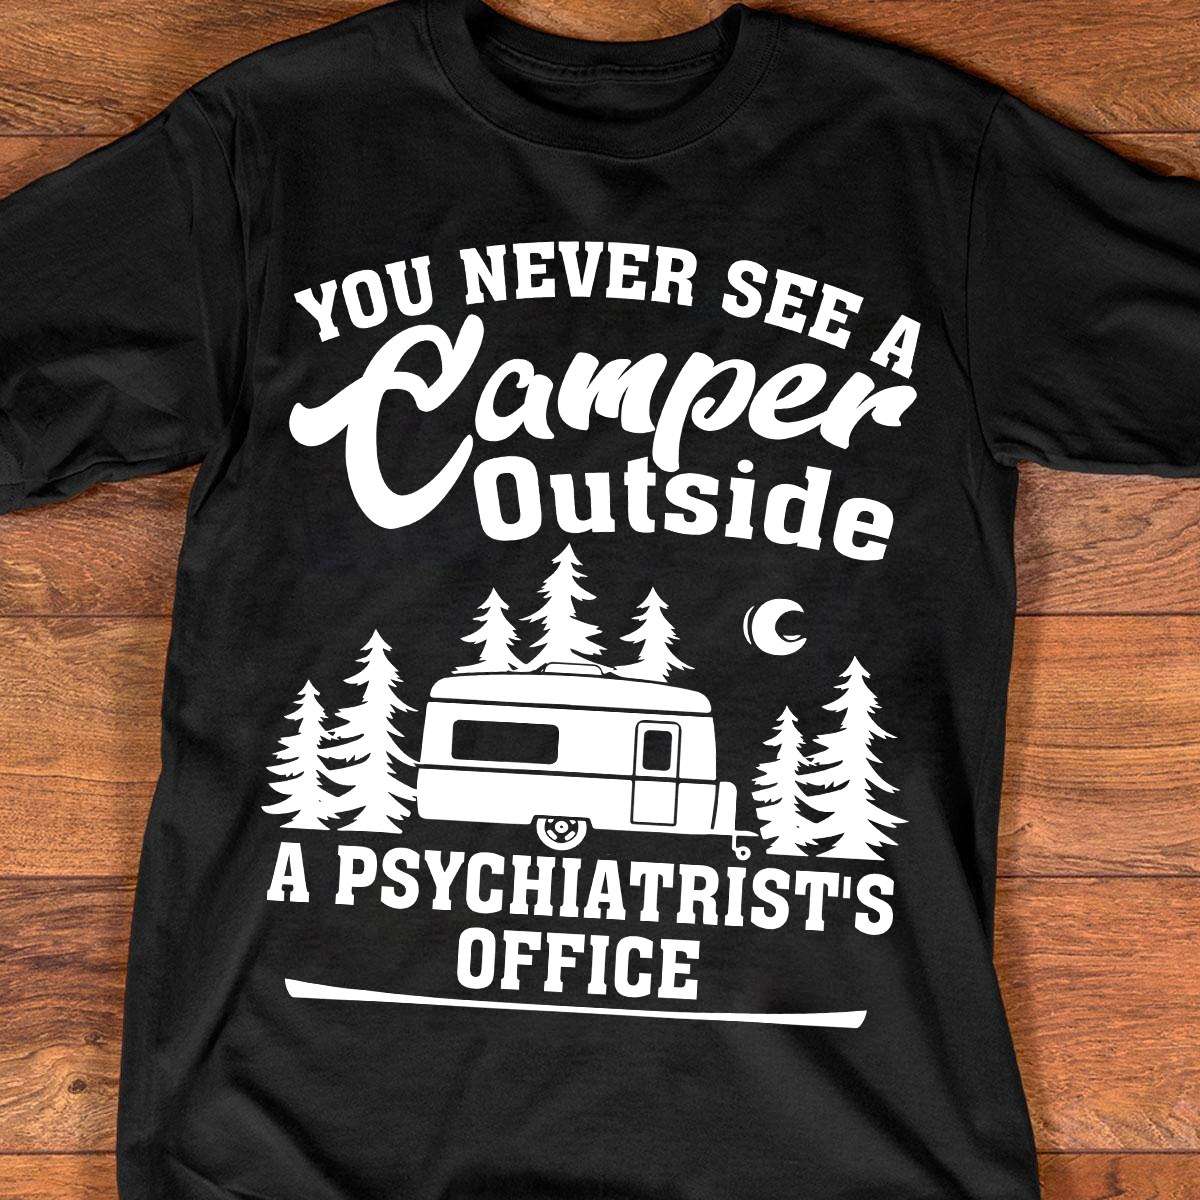 You never see a camper outside a psychiatrist's office - Gift for camping people, psychiatrist camping hobby